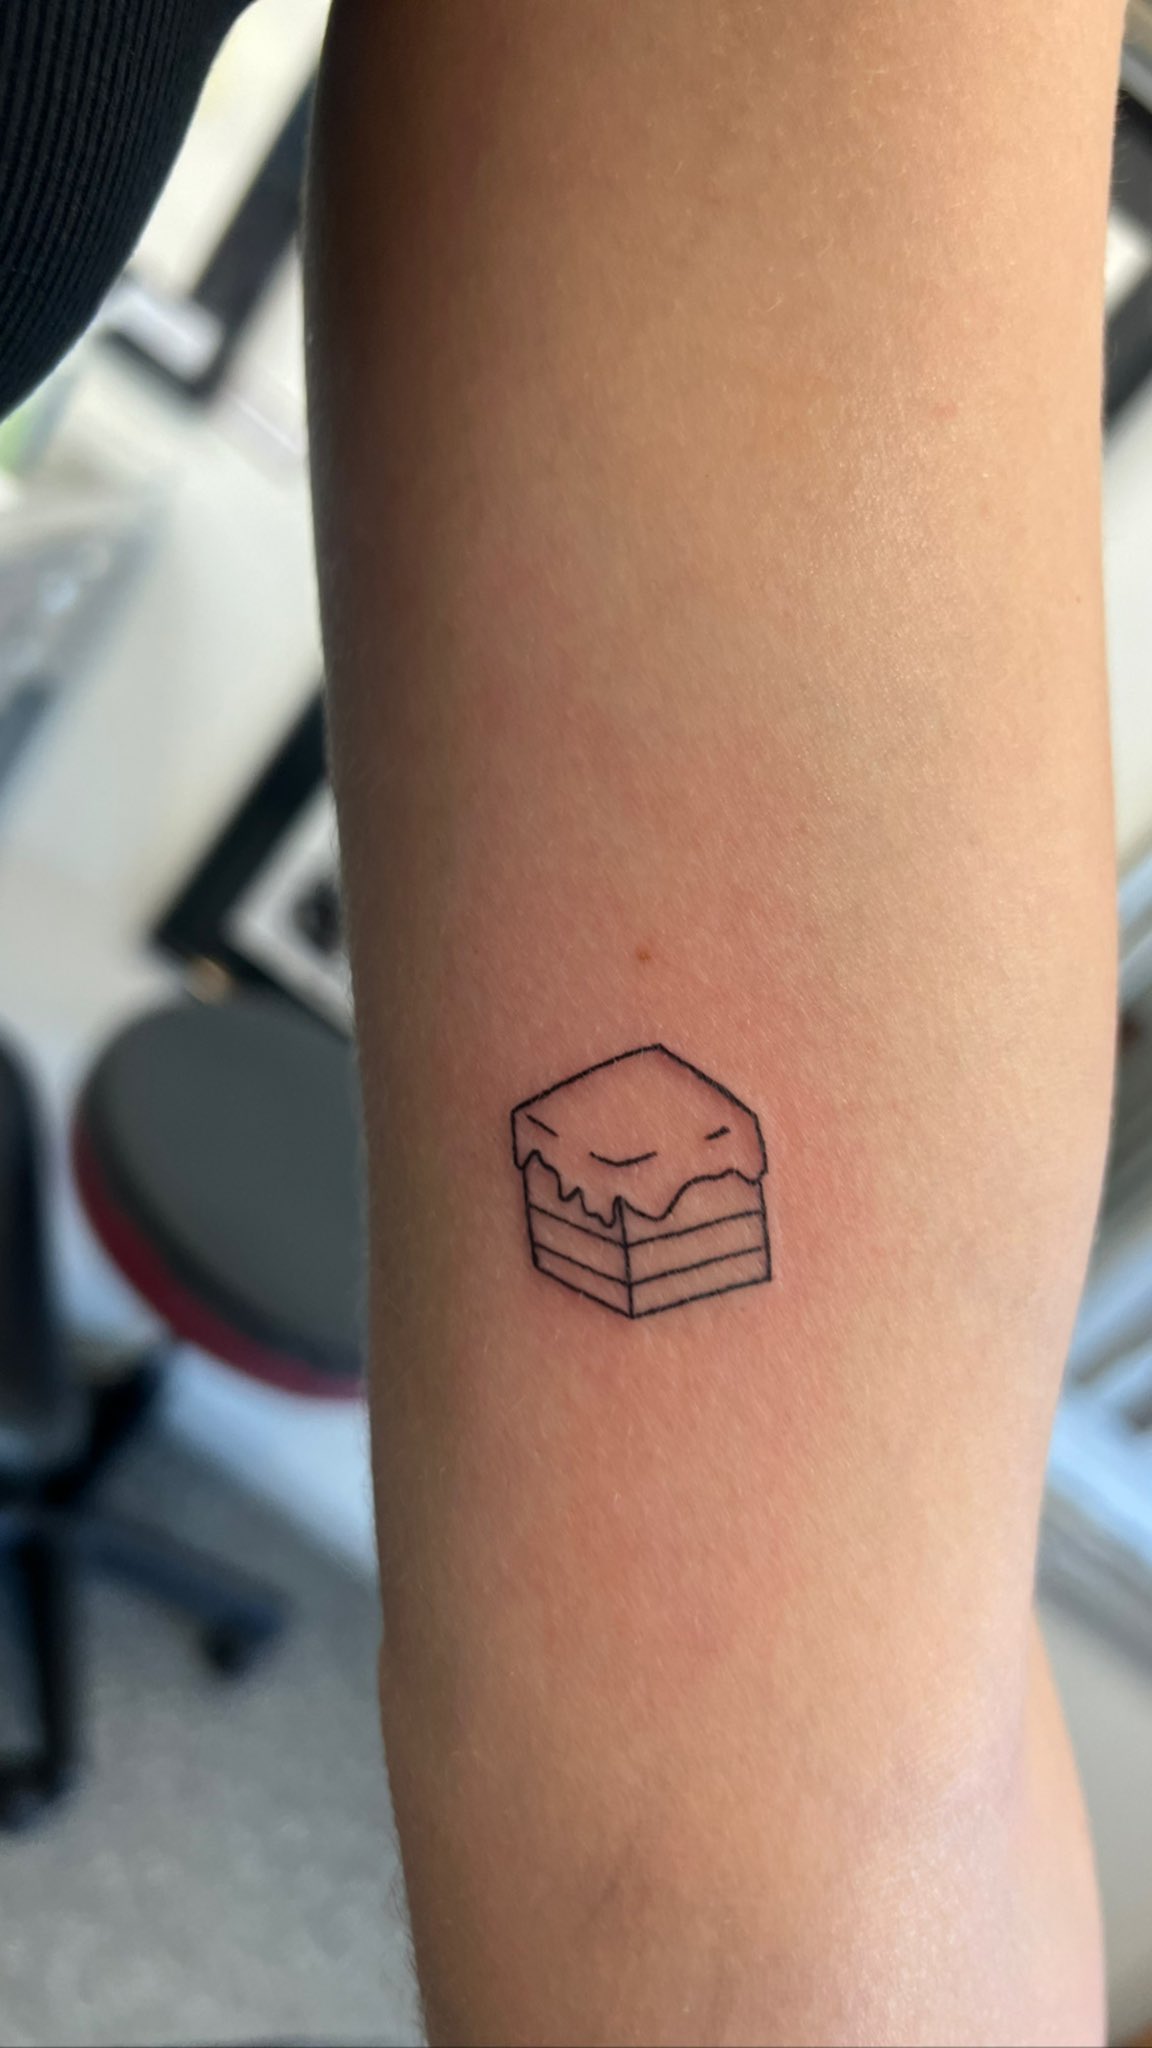 Does anyone know what this style of minimalist childish tattoos is called   Thank you   rTattooDesigns